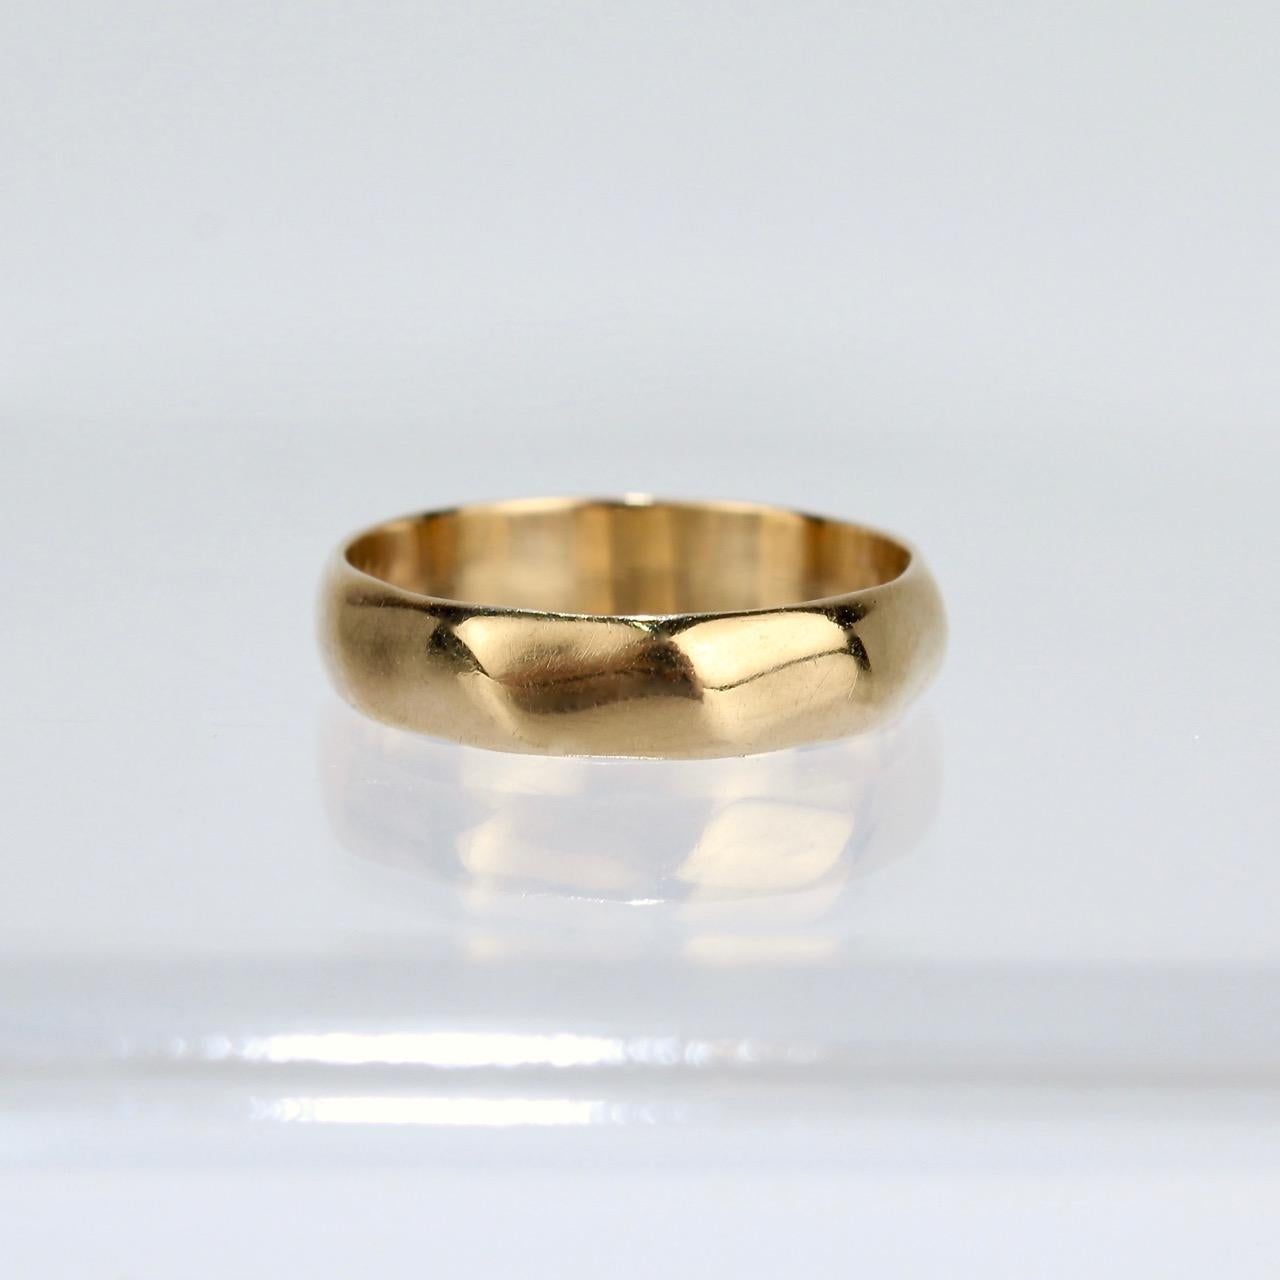 A fine American Mid-Century 14k gold wedding band.

Cool Mid-Century design with 10 rounded facets each set on an angle. 

The band is refined and strong in equal measure.  

The shank is stamped with a 14K mark for fineness and with the Bristol